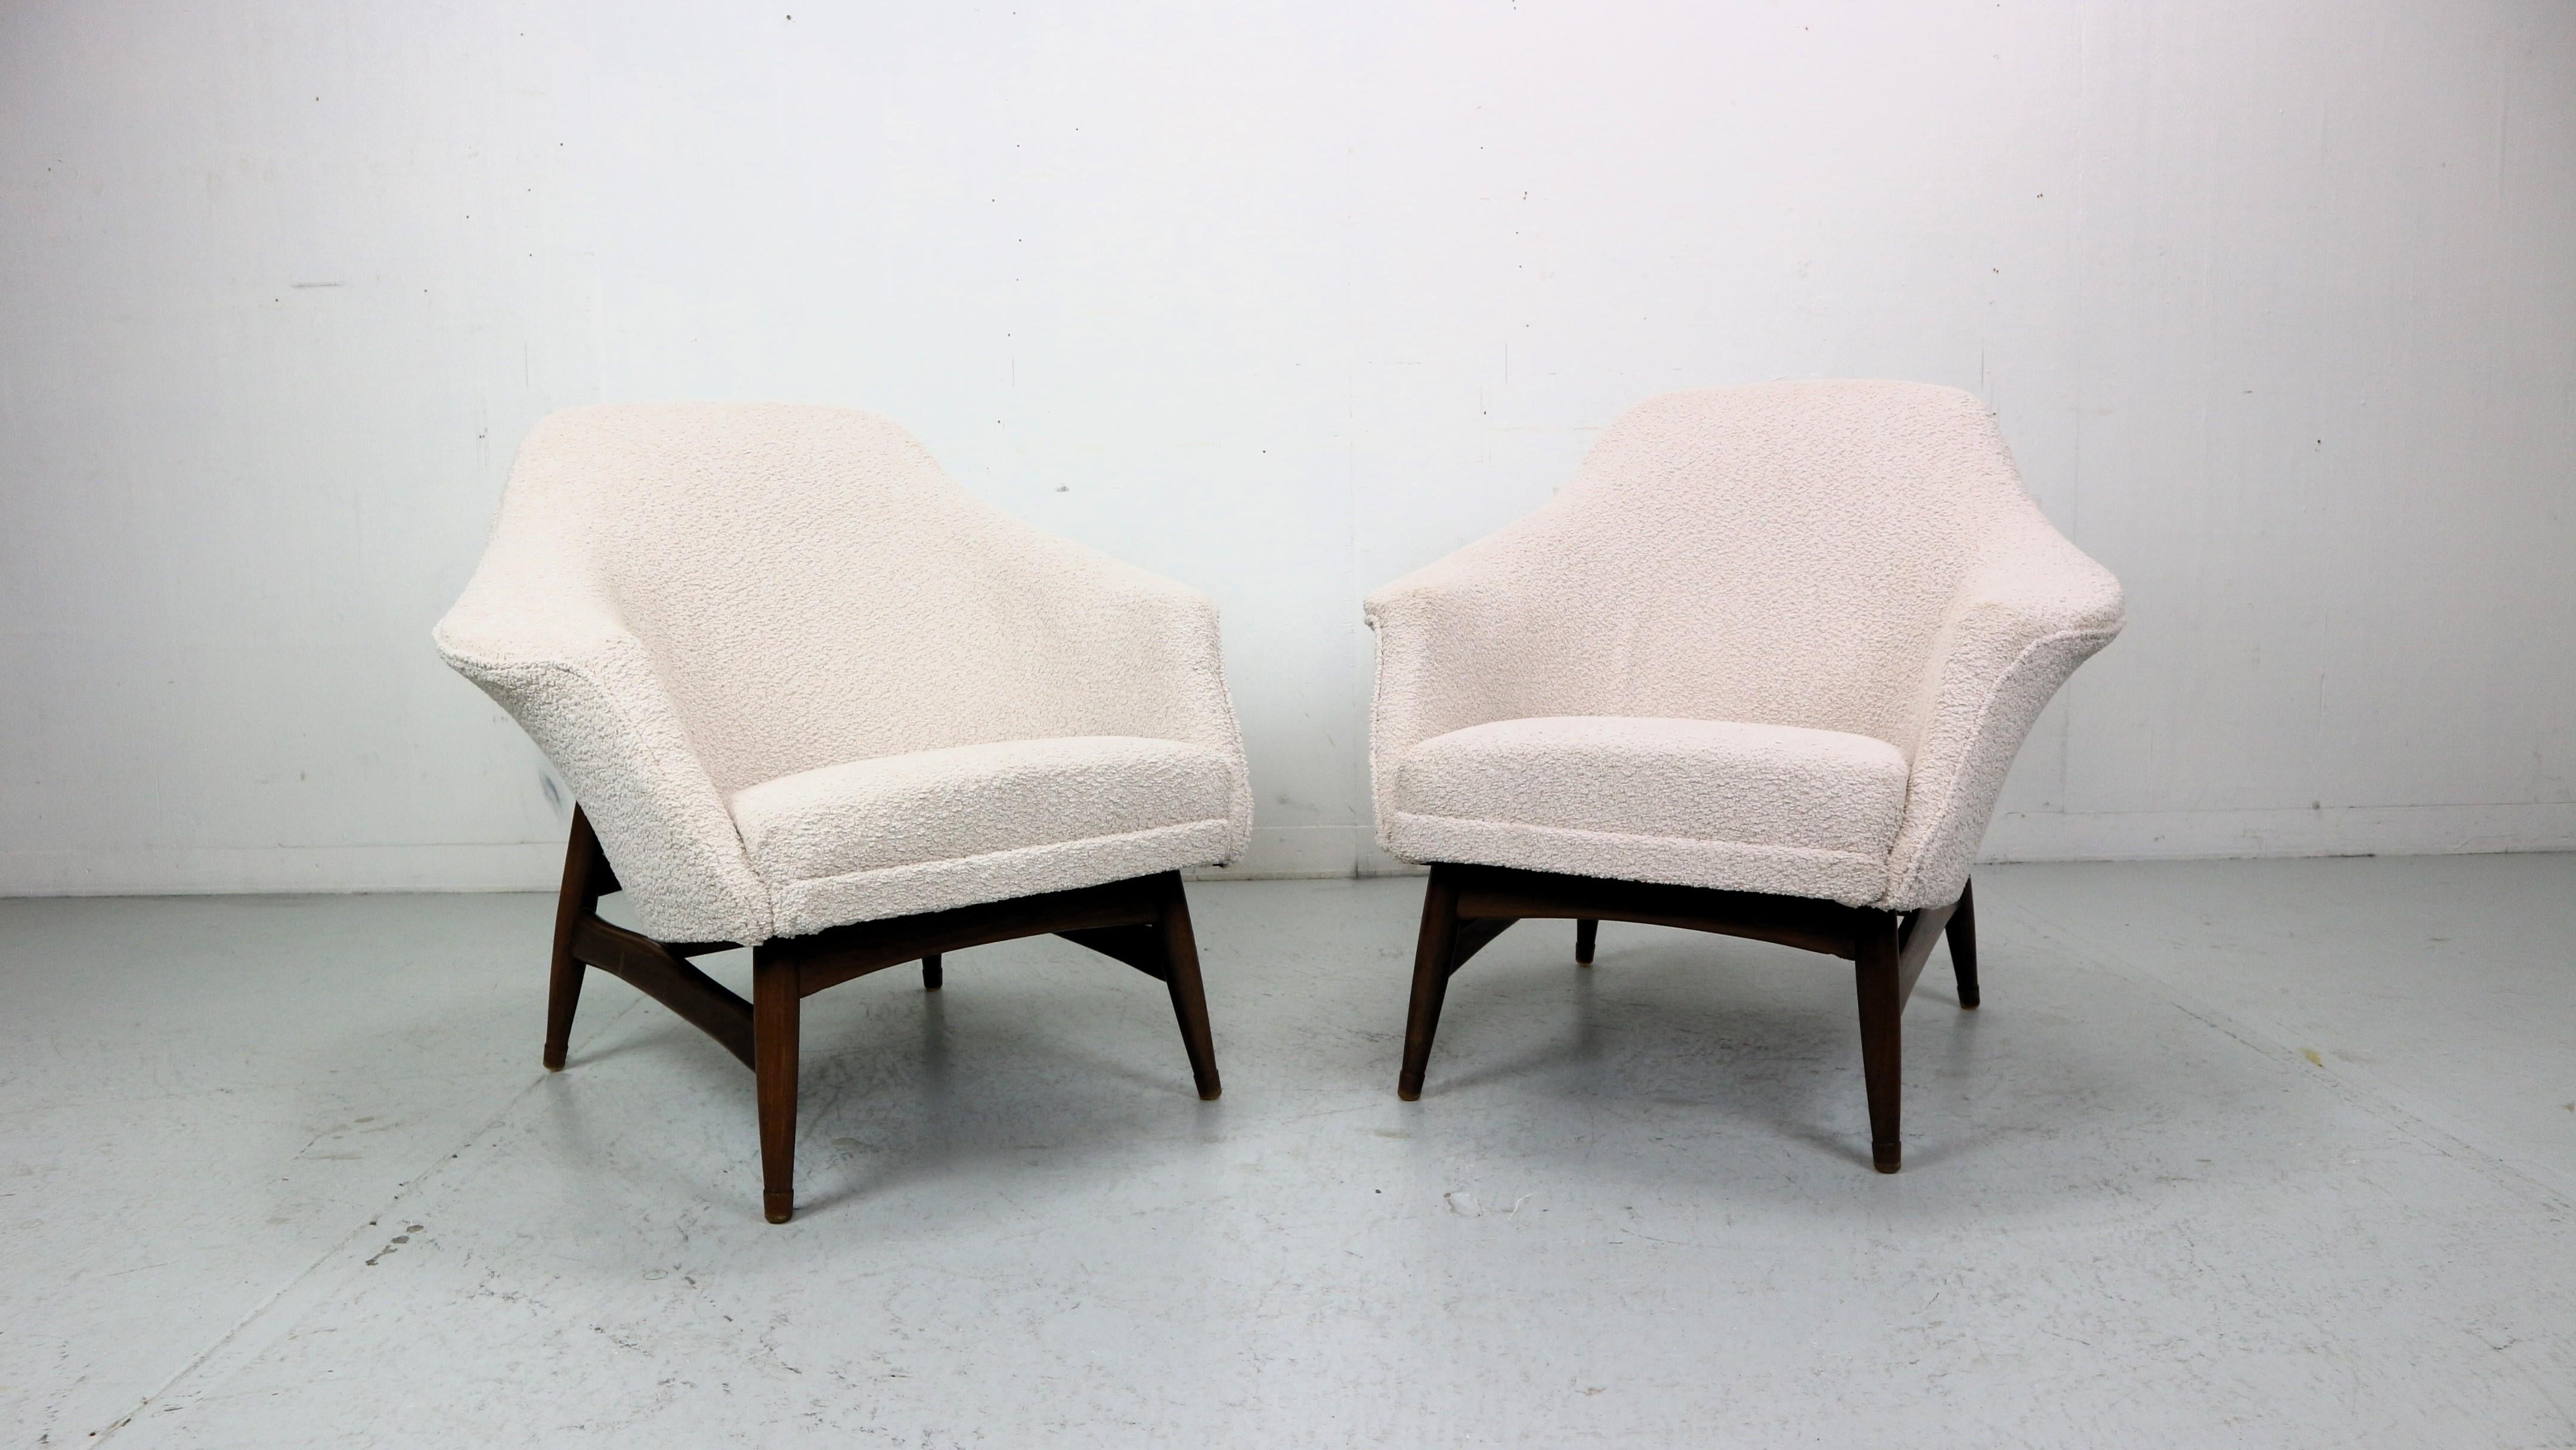 Beautiful armchair newly upholstered in off-white bouclé fabric, designed by Julia Gaubek, a Polish architect, designer of Industrial Design and interior architecture, professor at the Academy of Fine Arts in Gdansk.

The armchairs were made in the